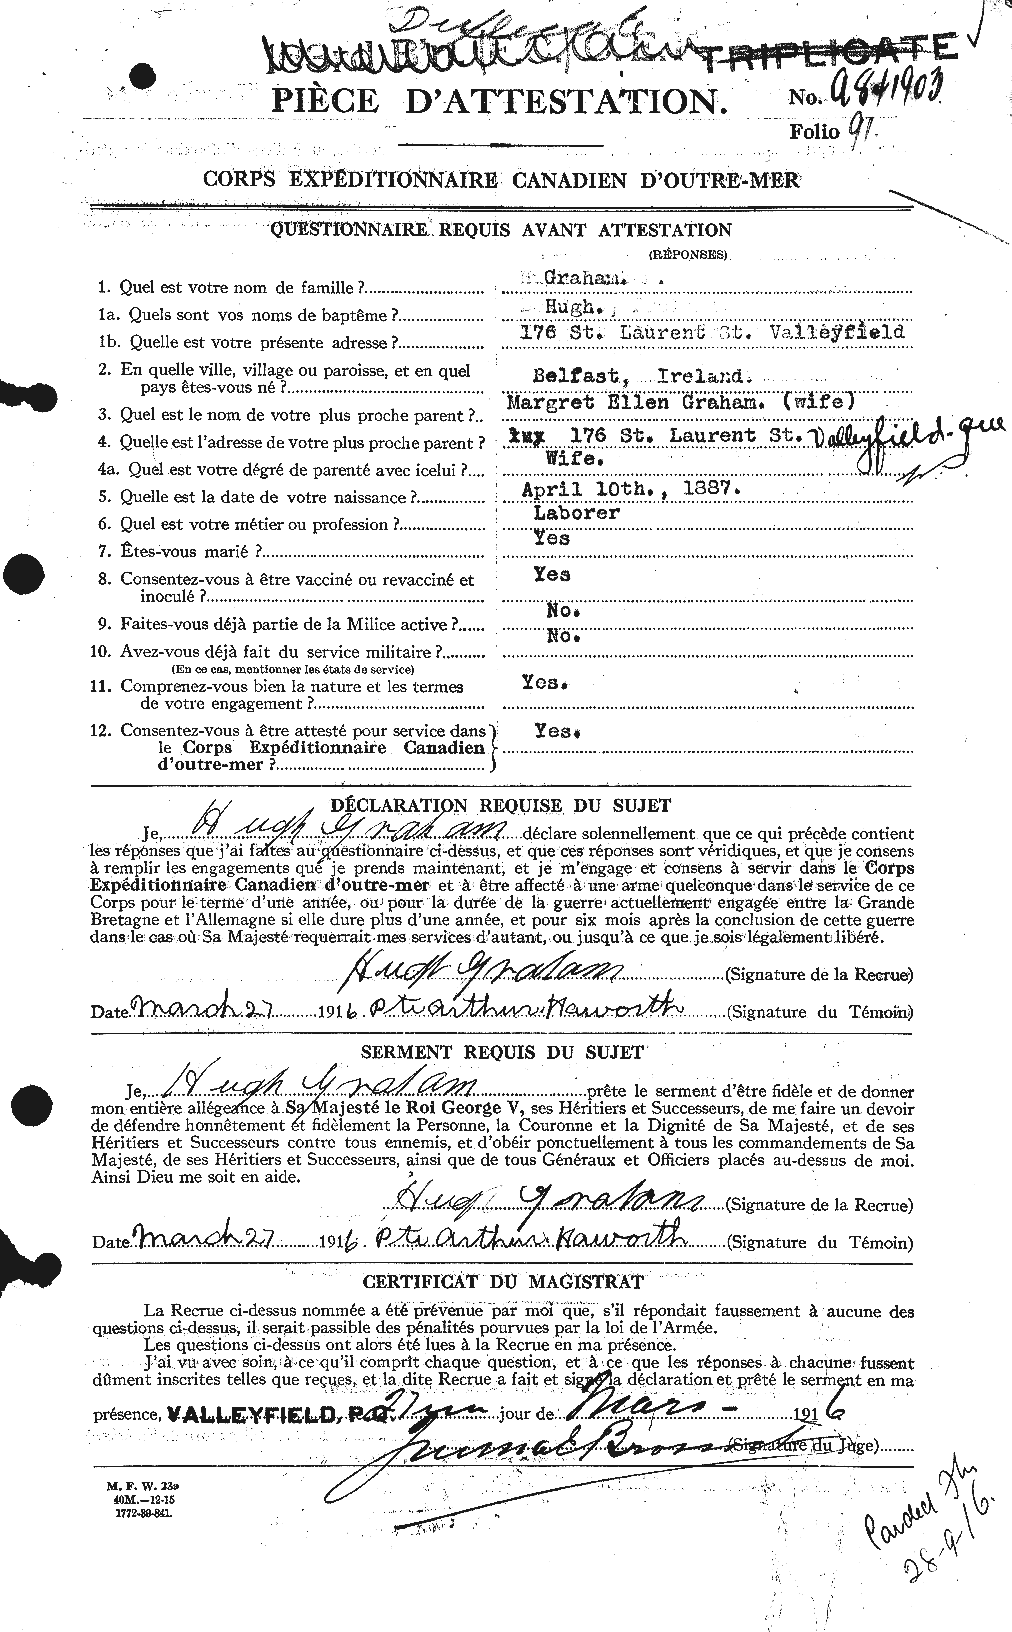 Personnel Records of the First World War - CEF 357758a